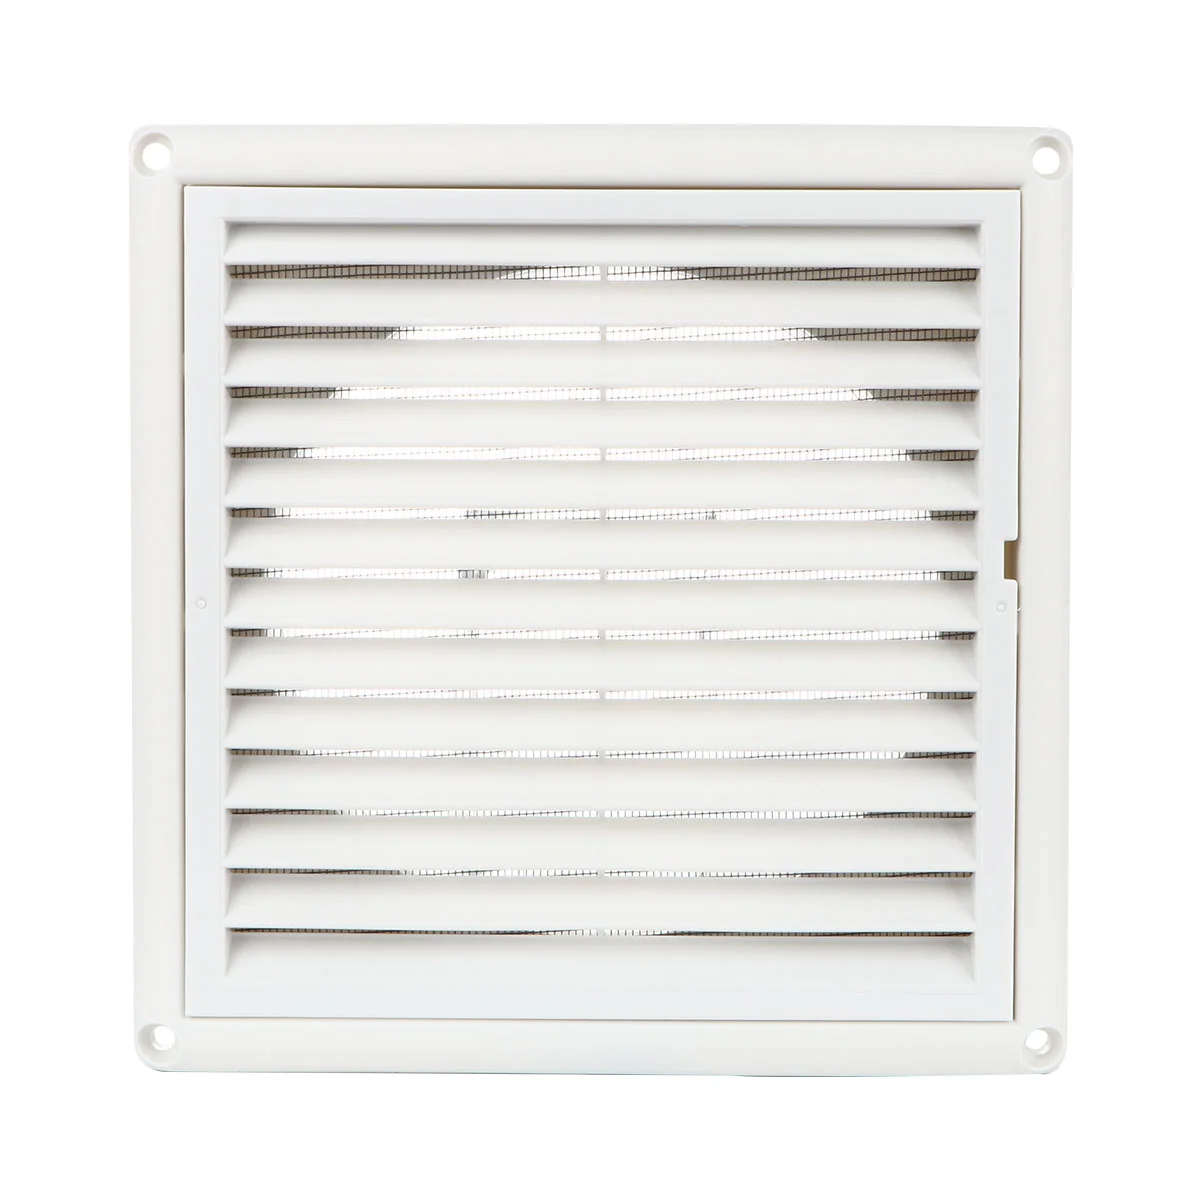 

Air Vent Ventilation Grill Cover Wall Ceiling Mounted Vent Built-in Fly Screen Mesh for Bathroom Office Home (White)